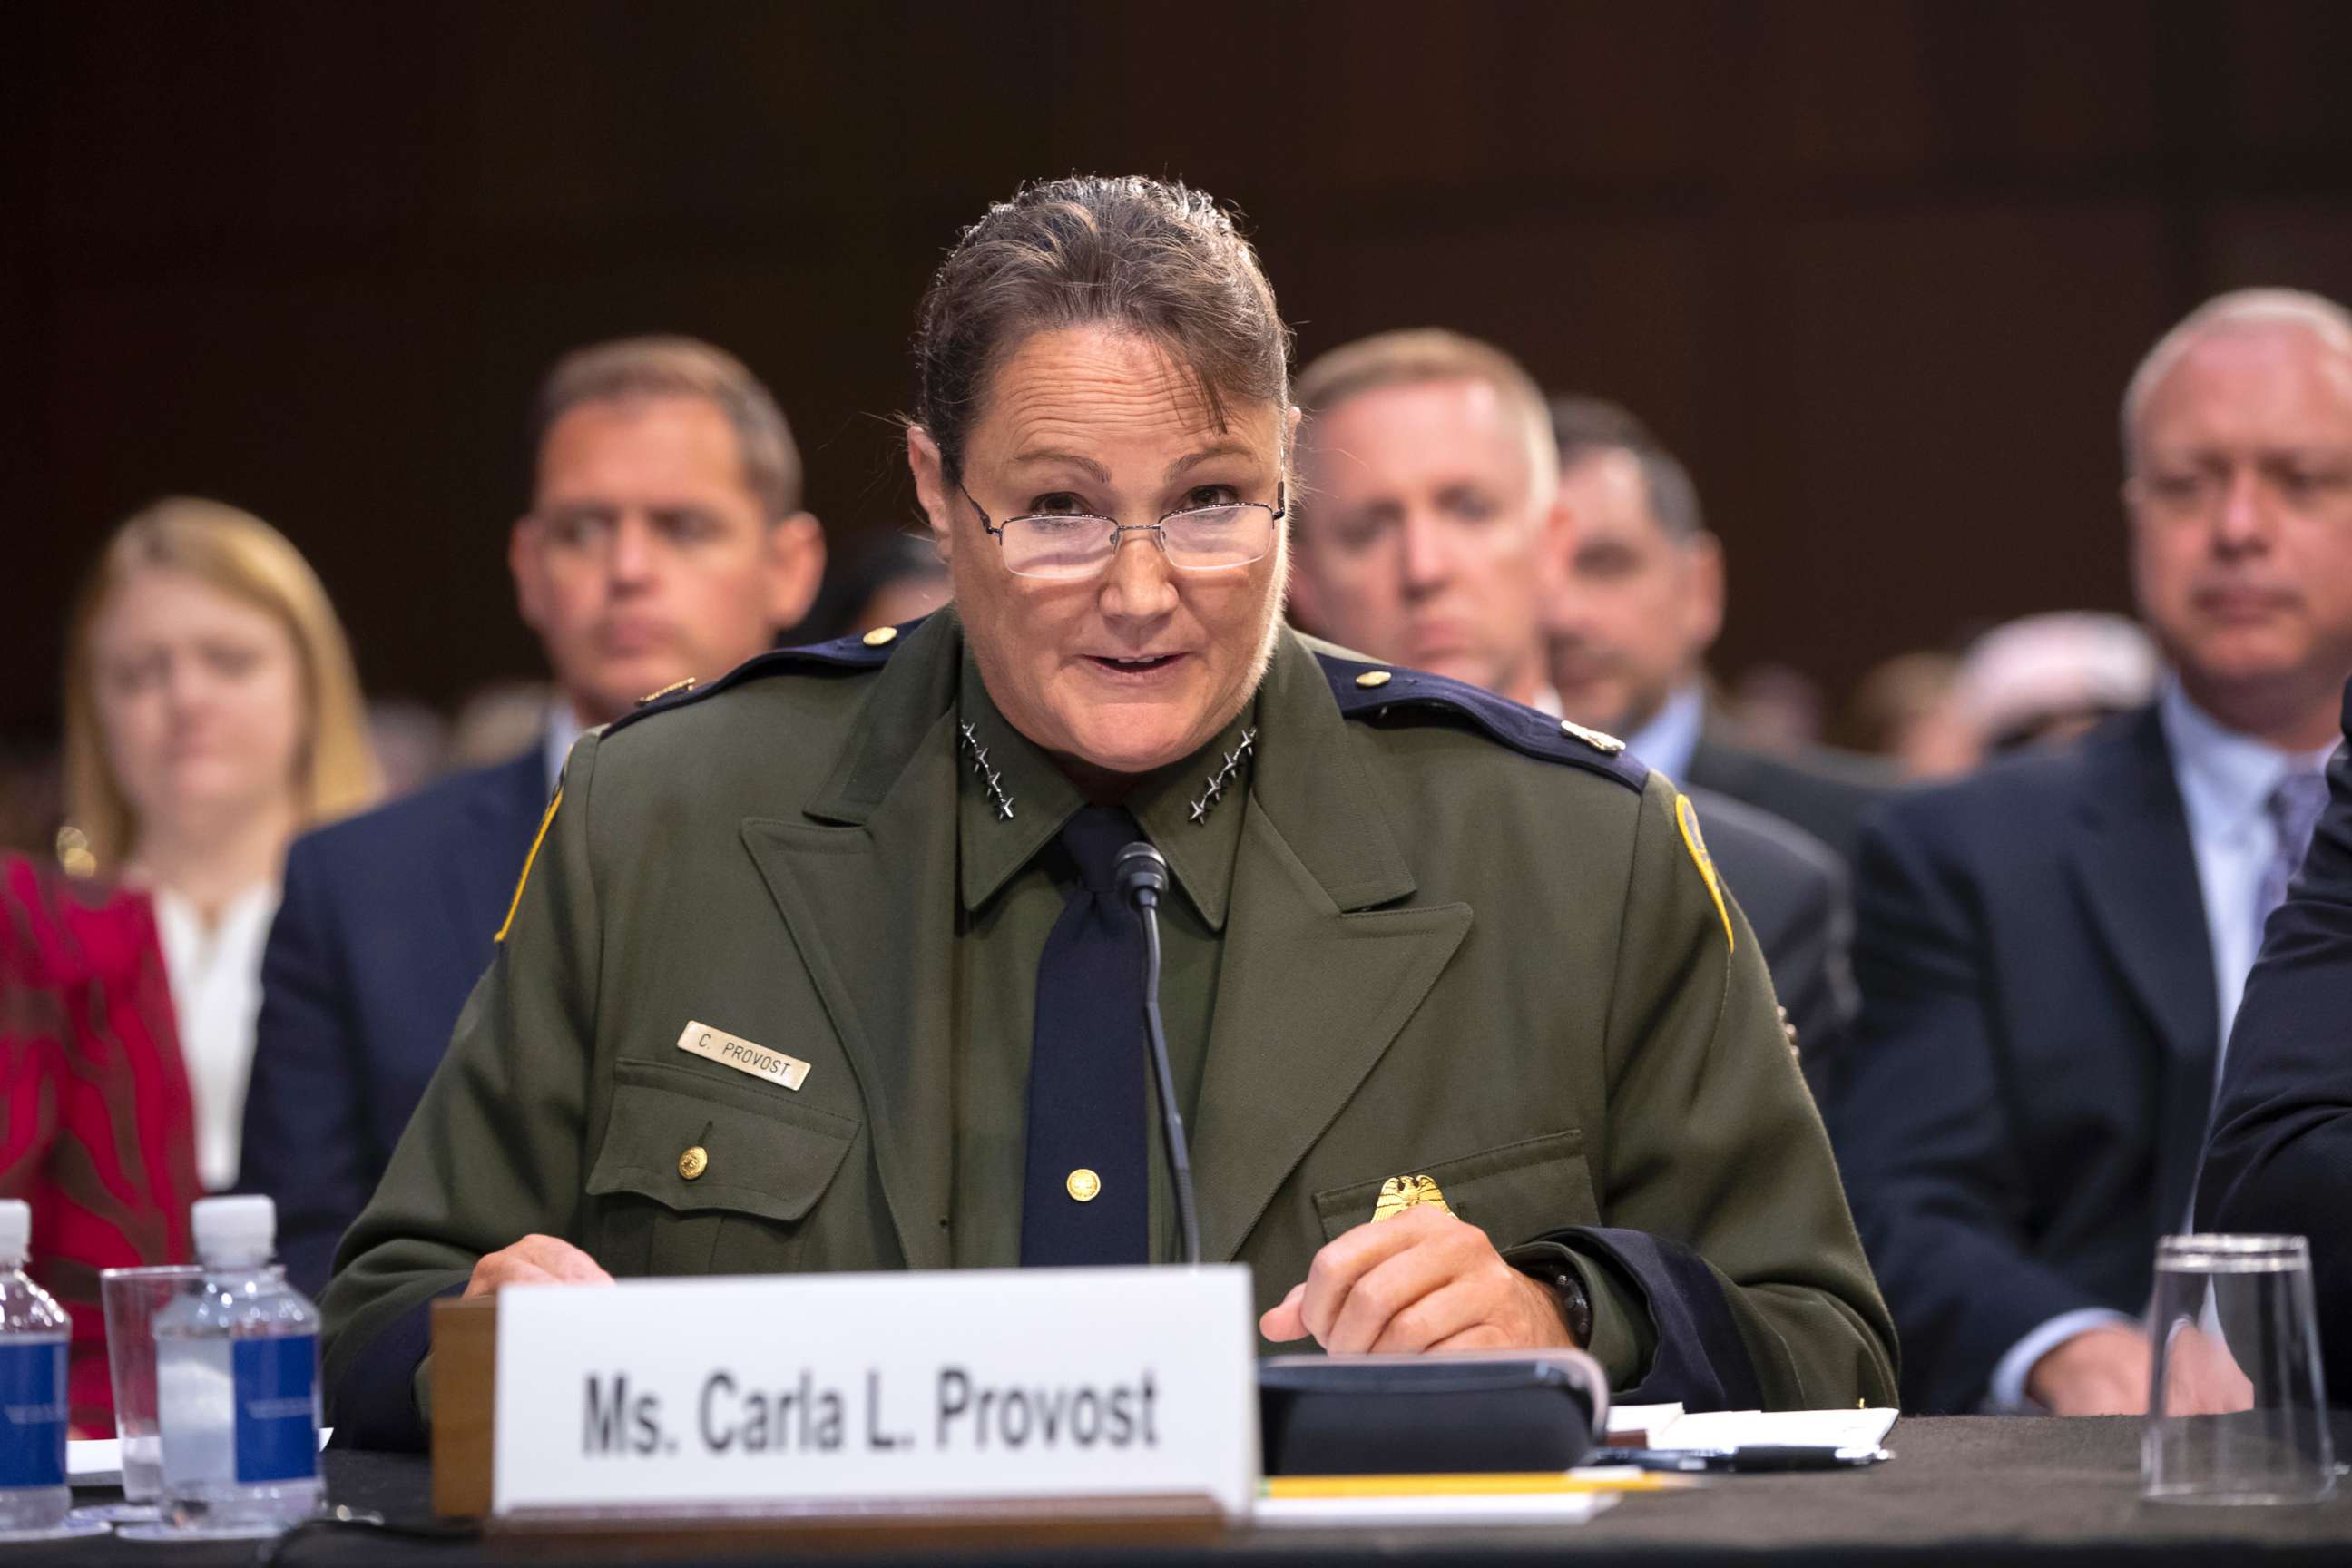 PHOTO: Customs and Border Protection U.S. Border Patrol Acting Chief Carla Provost makes an opening statement as the Senate Judiciary Committee holds a hearing, on Capitol Hill in Washington, July 31, 2018.